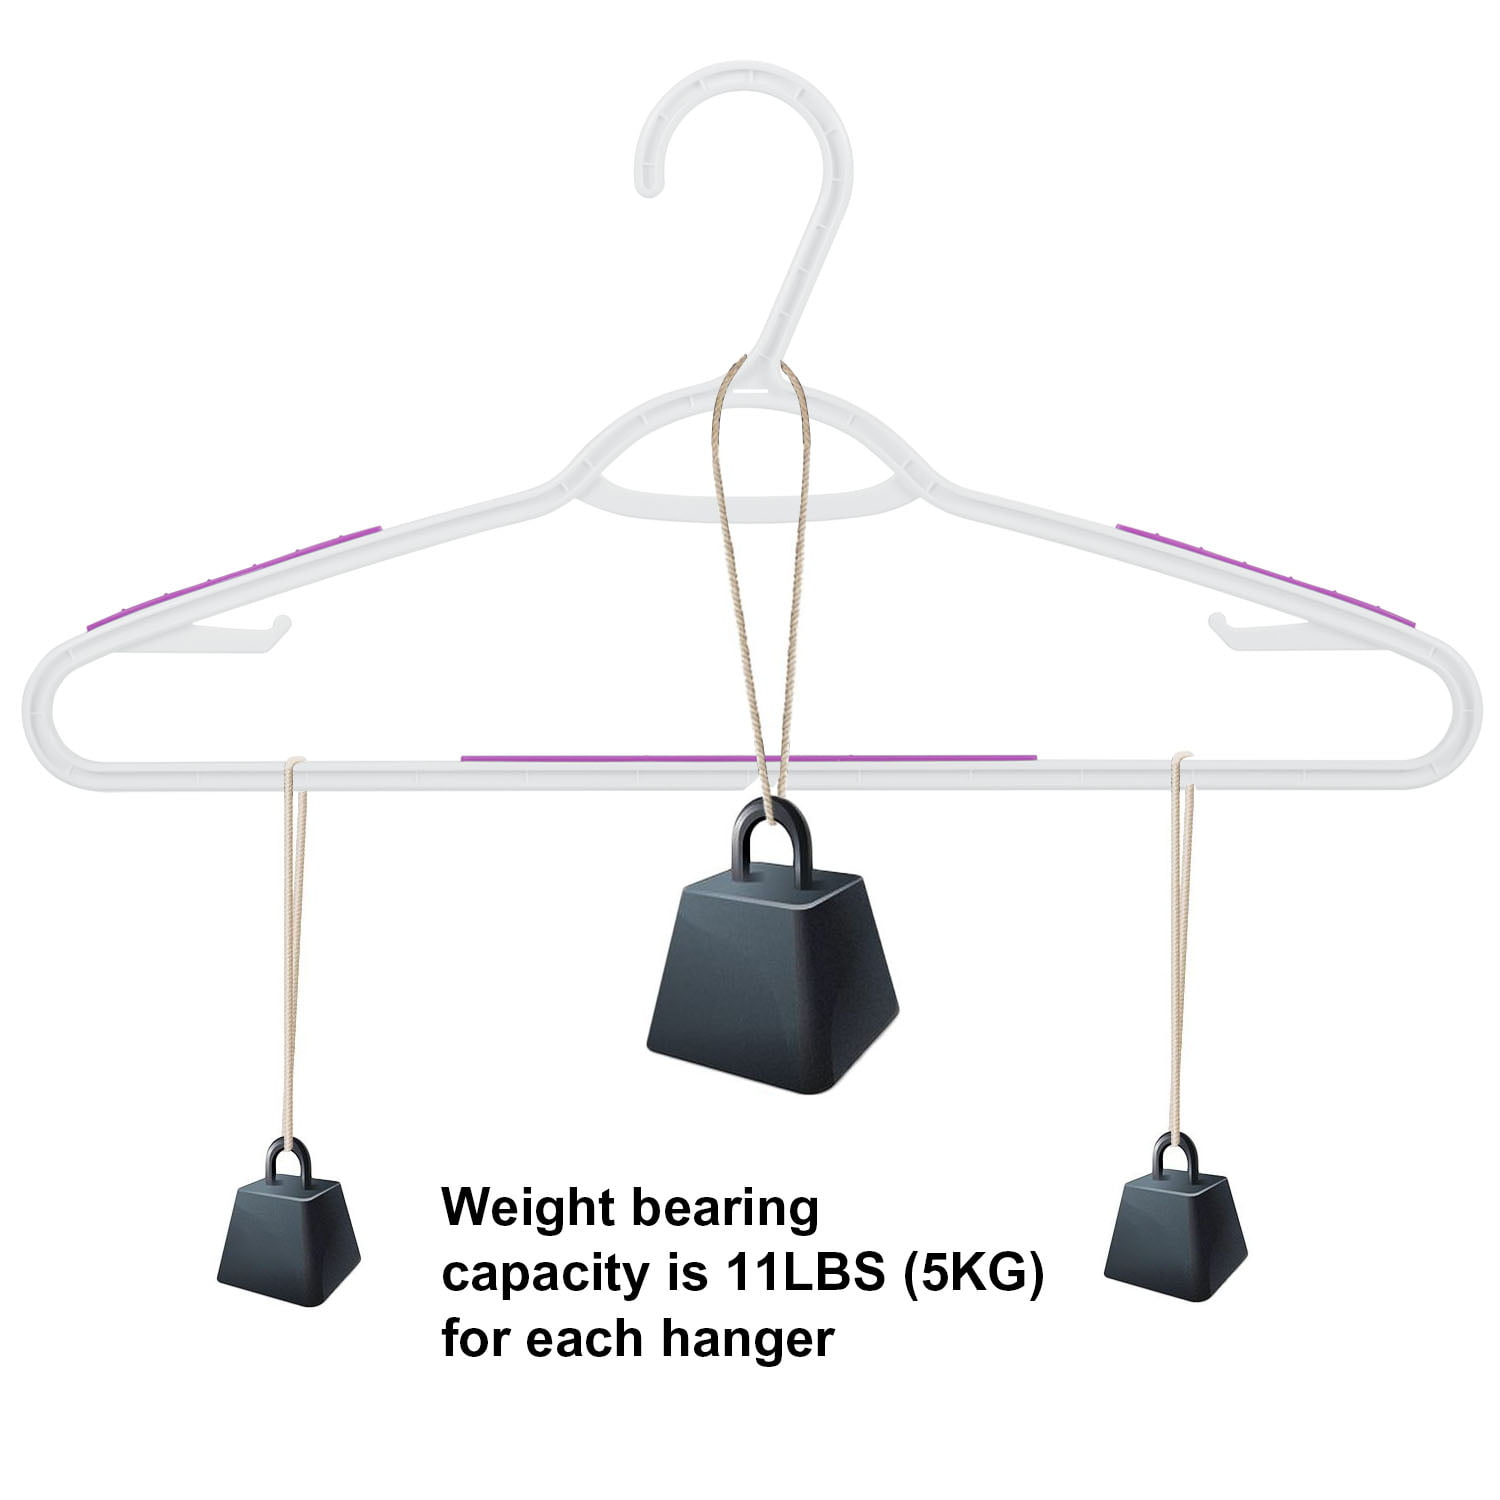 Mjrasg 60-Pack Macaron Pink Plastic Anti-Slip Hangers, Heavy Duty, Space Saving, Ideal for Baby's Clothes, Hanging Belts and Accessories